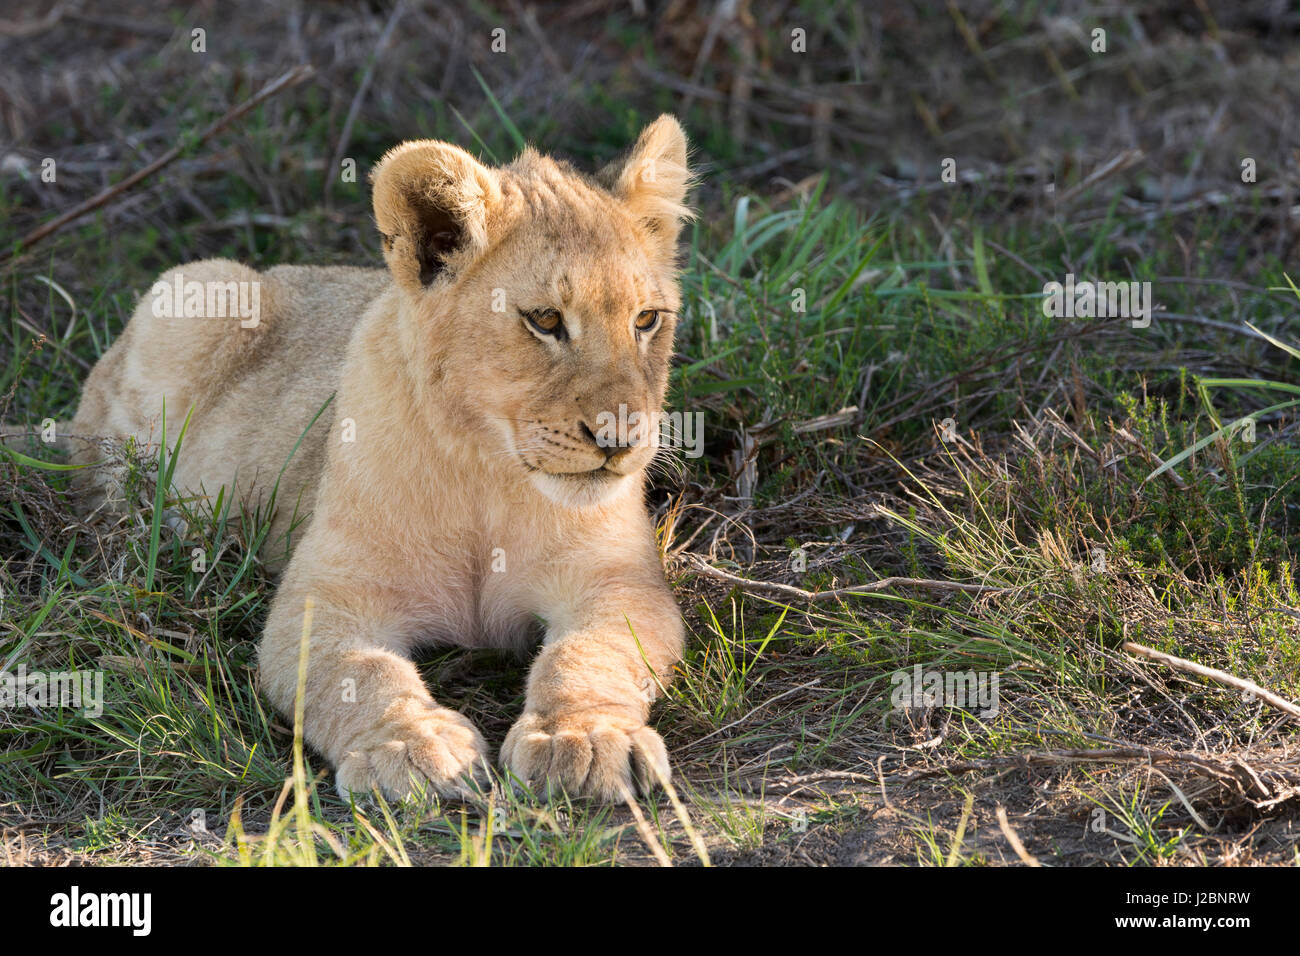 South Africa, Eastern Cape, East London. Inkwenkwezi Game Reserve. Lion cub Stock Photo